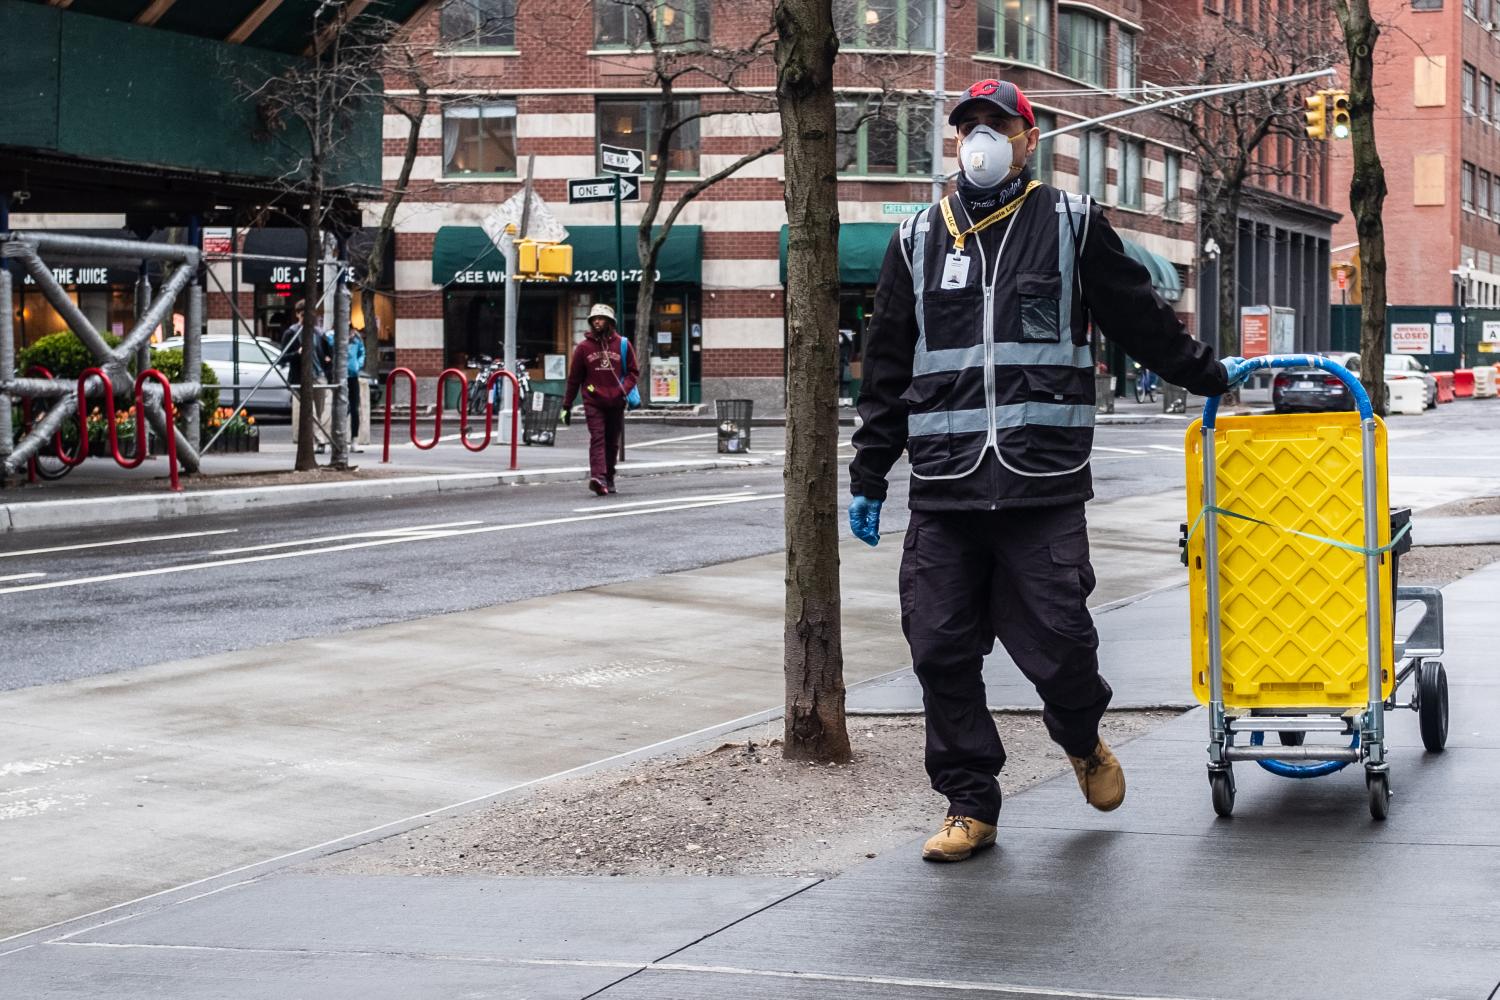 An essential delivery worker wearing personal protective equipment in Tribeca, New York during the COVID-19 pandemic.